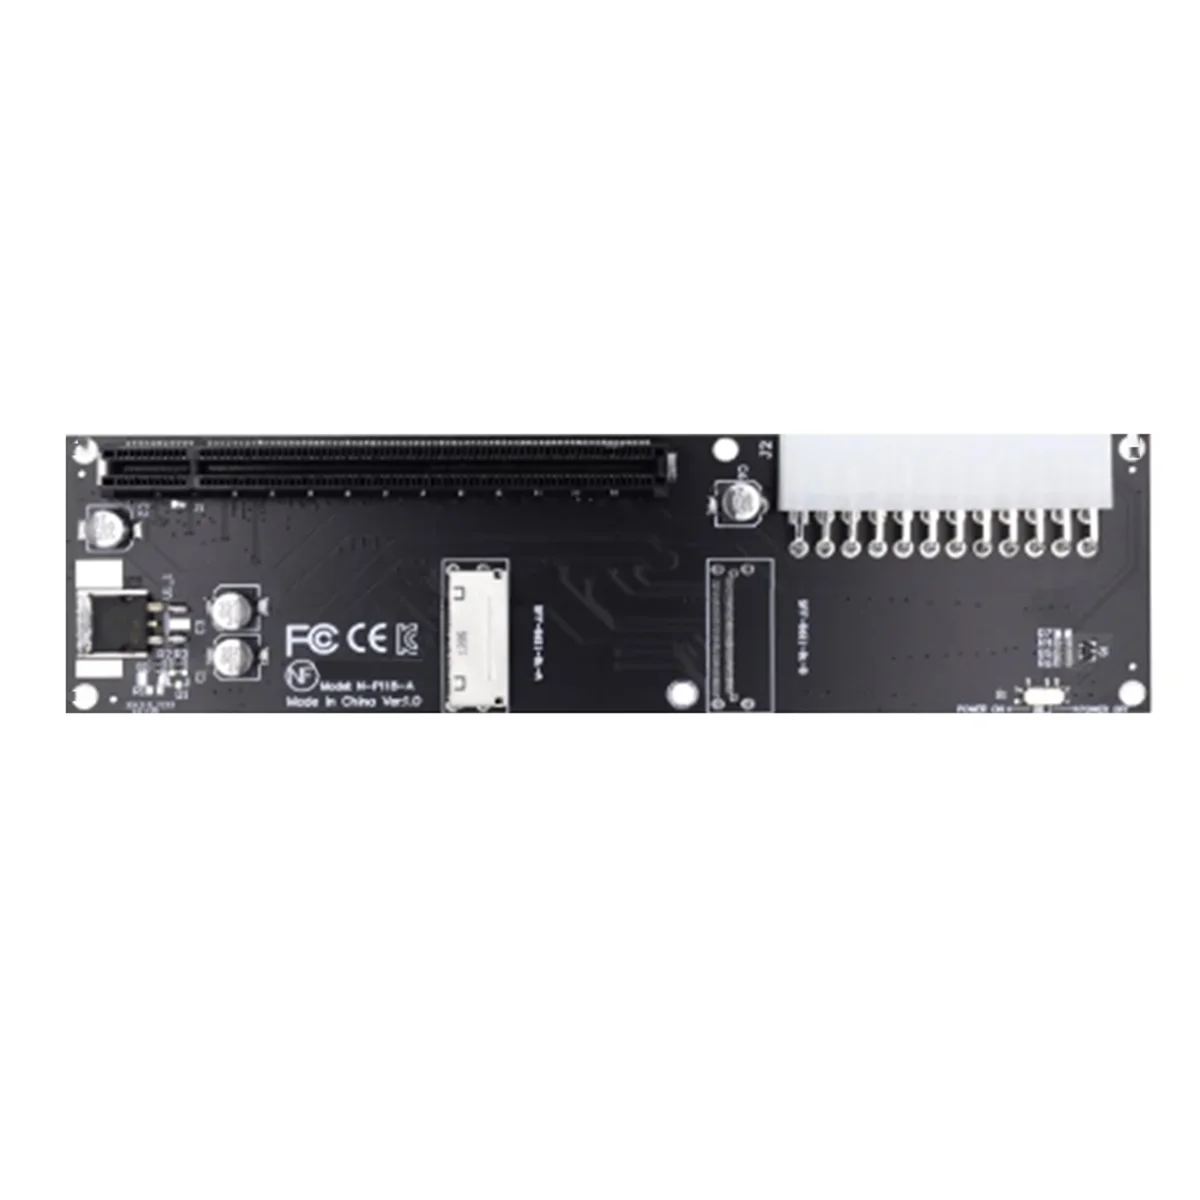 

Oculink SFF-8612 8X to PCIE X16 PCI-Express Adapter with ATX 24Pin Power Port for Mainboard Graphics Card